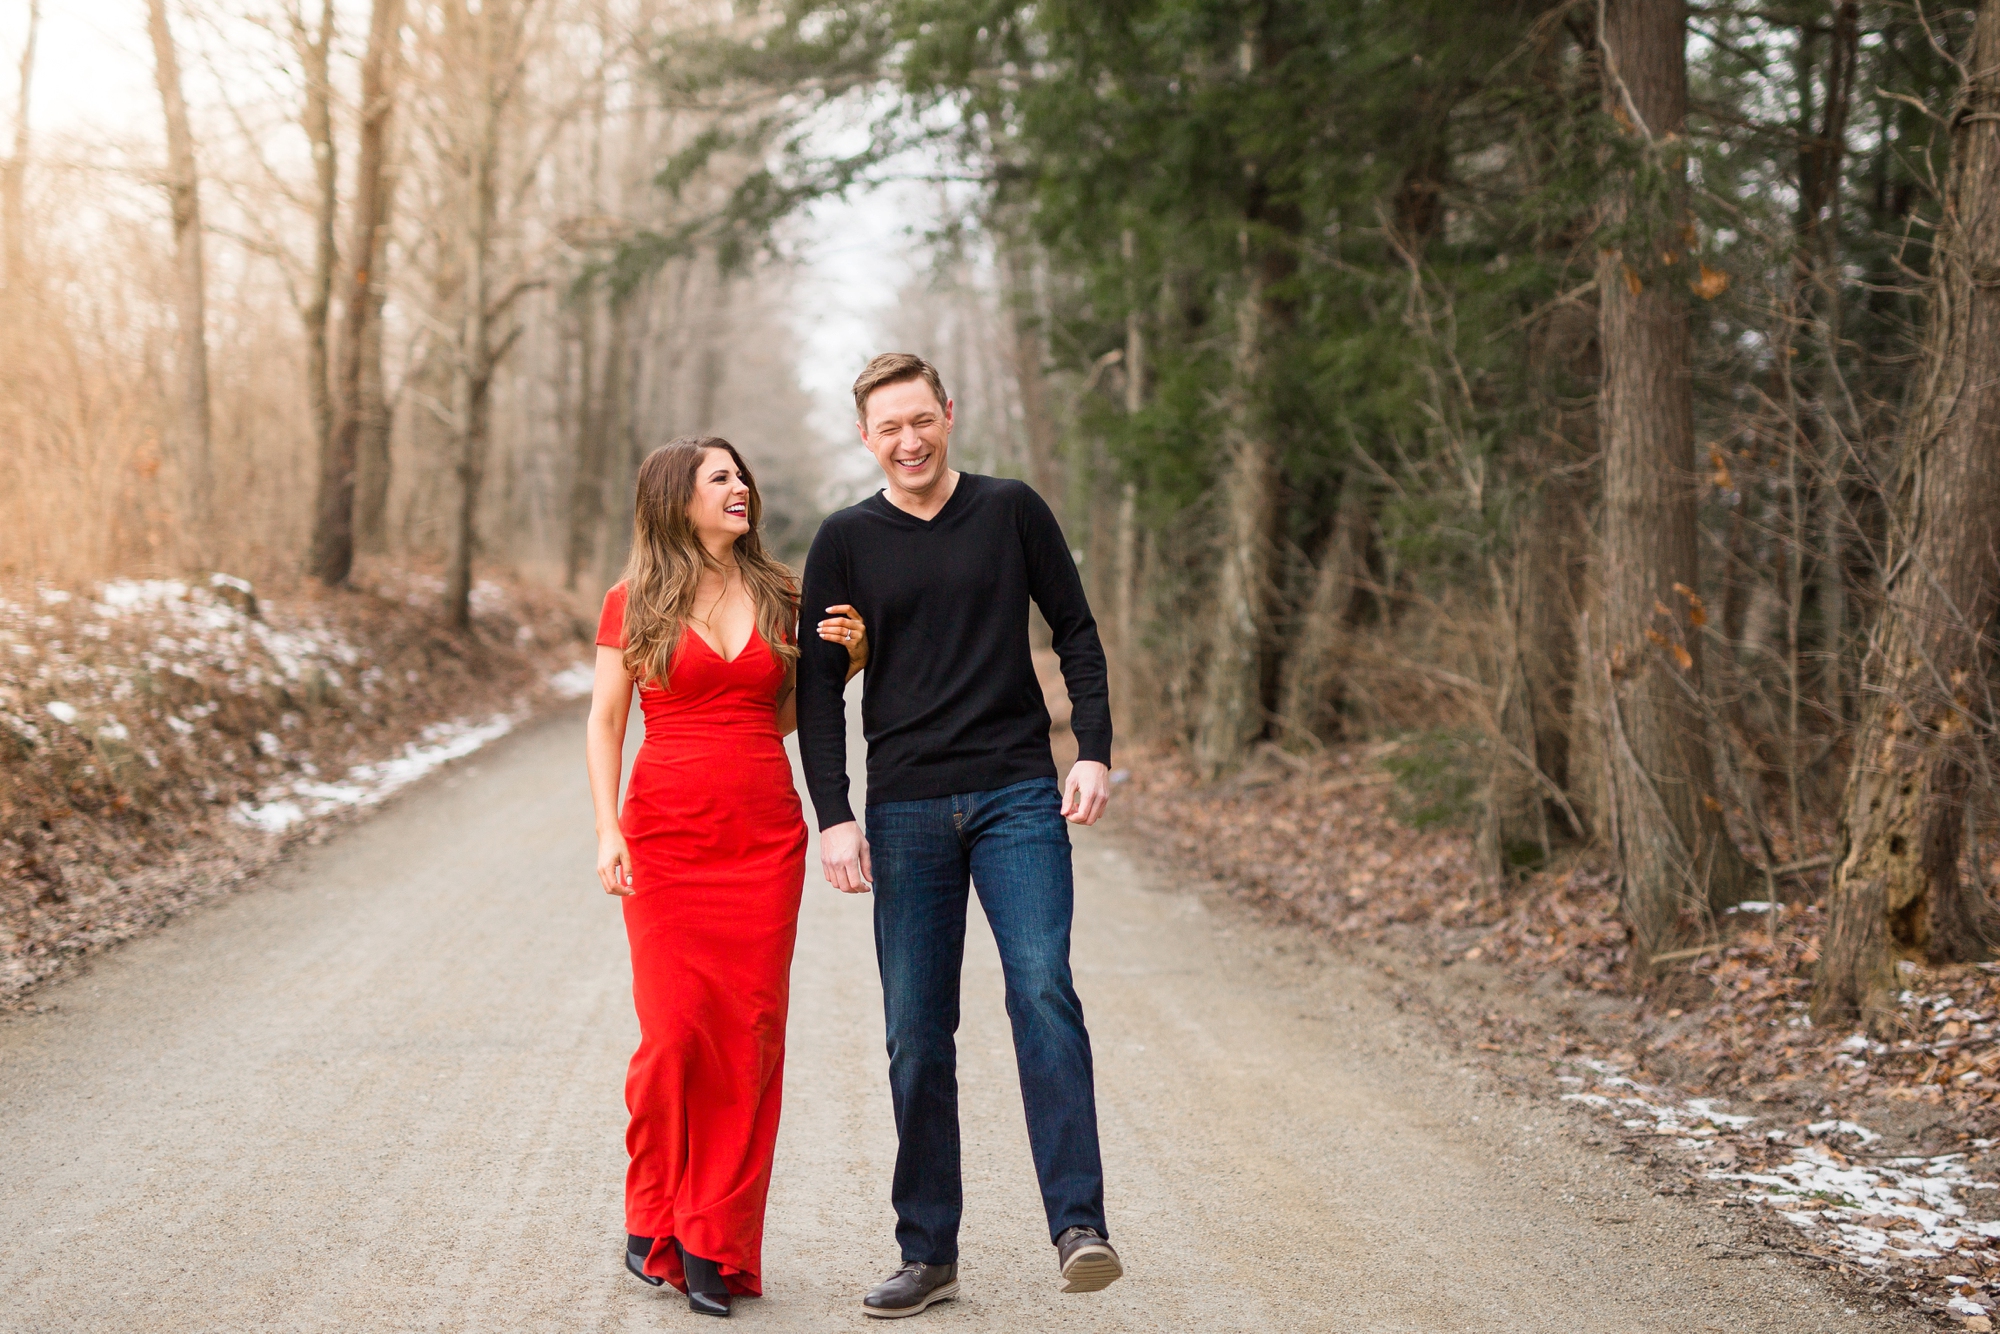 mcconnells mill, mcconnells mill engagement pictures, wedding photographer pittsburgh, pittsburgh wedding venues